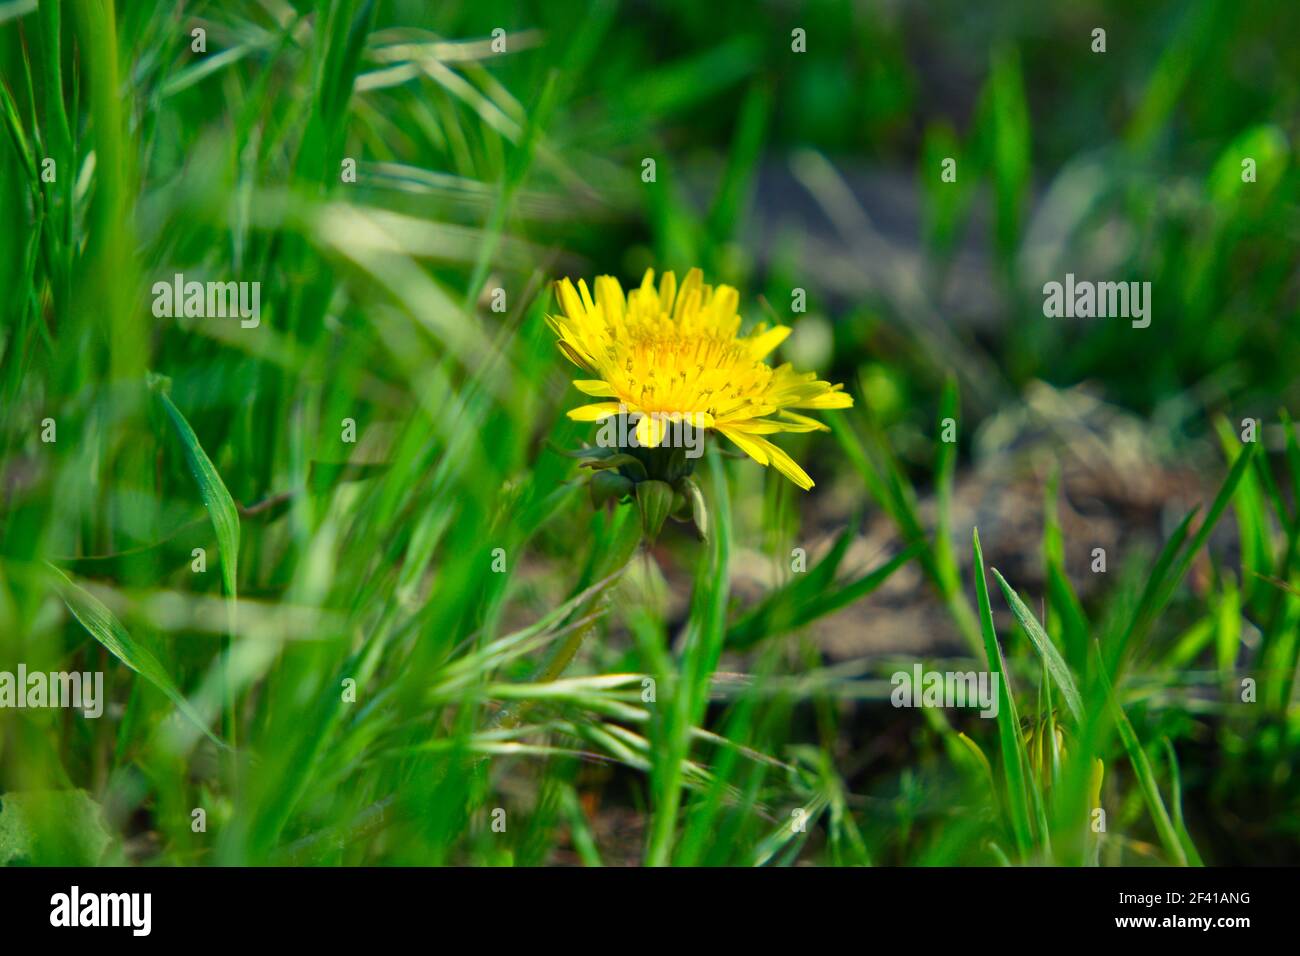 Small yellow floret of young dandelion hiding in grass in April. Small yellow floret of young dandelion hiding in grass Stock Photo